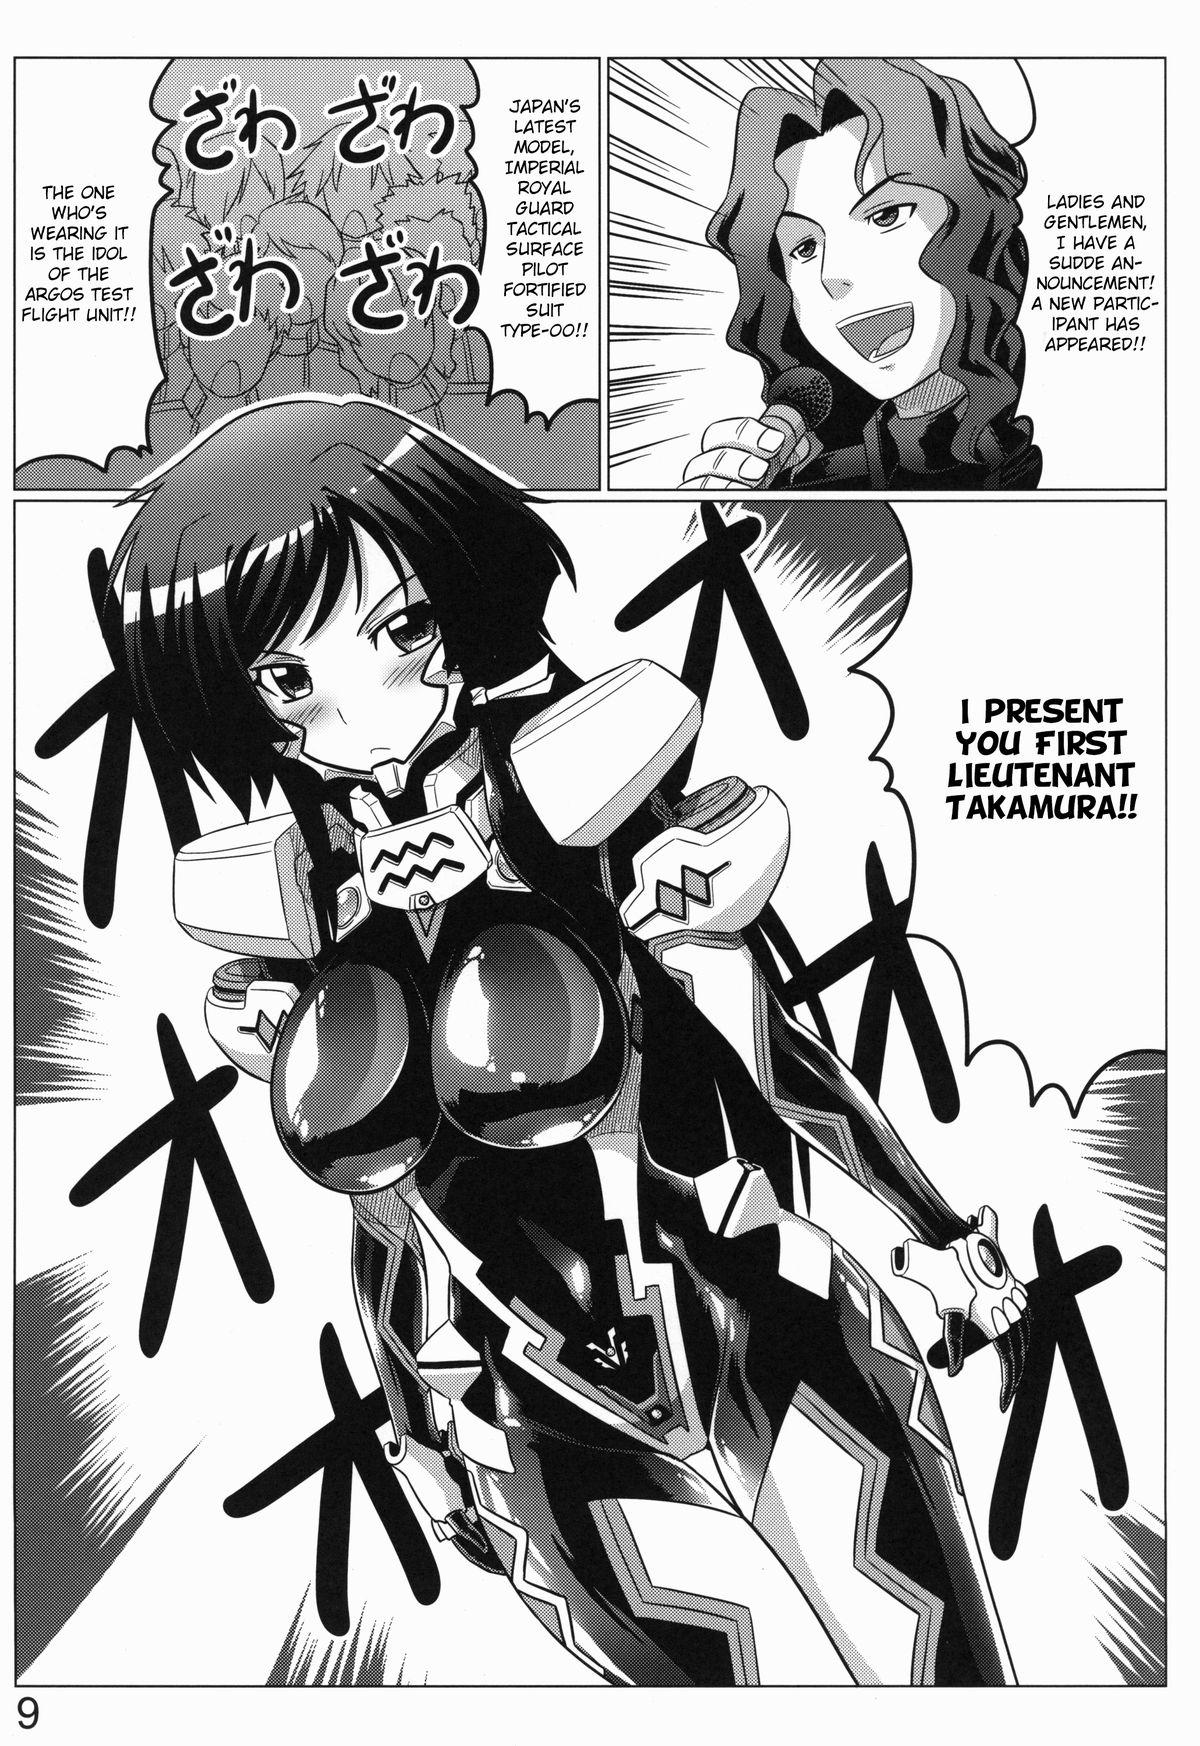 Real Amateur 0-Shiki LOVE - Muv-luv alternative total eclipse Twistys - Page 8